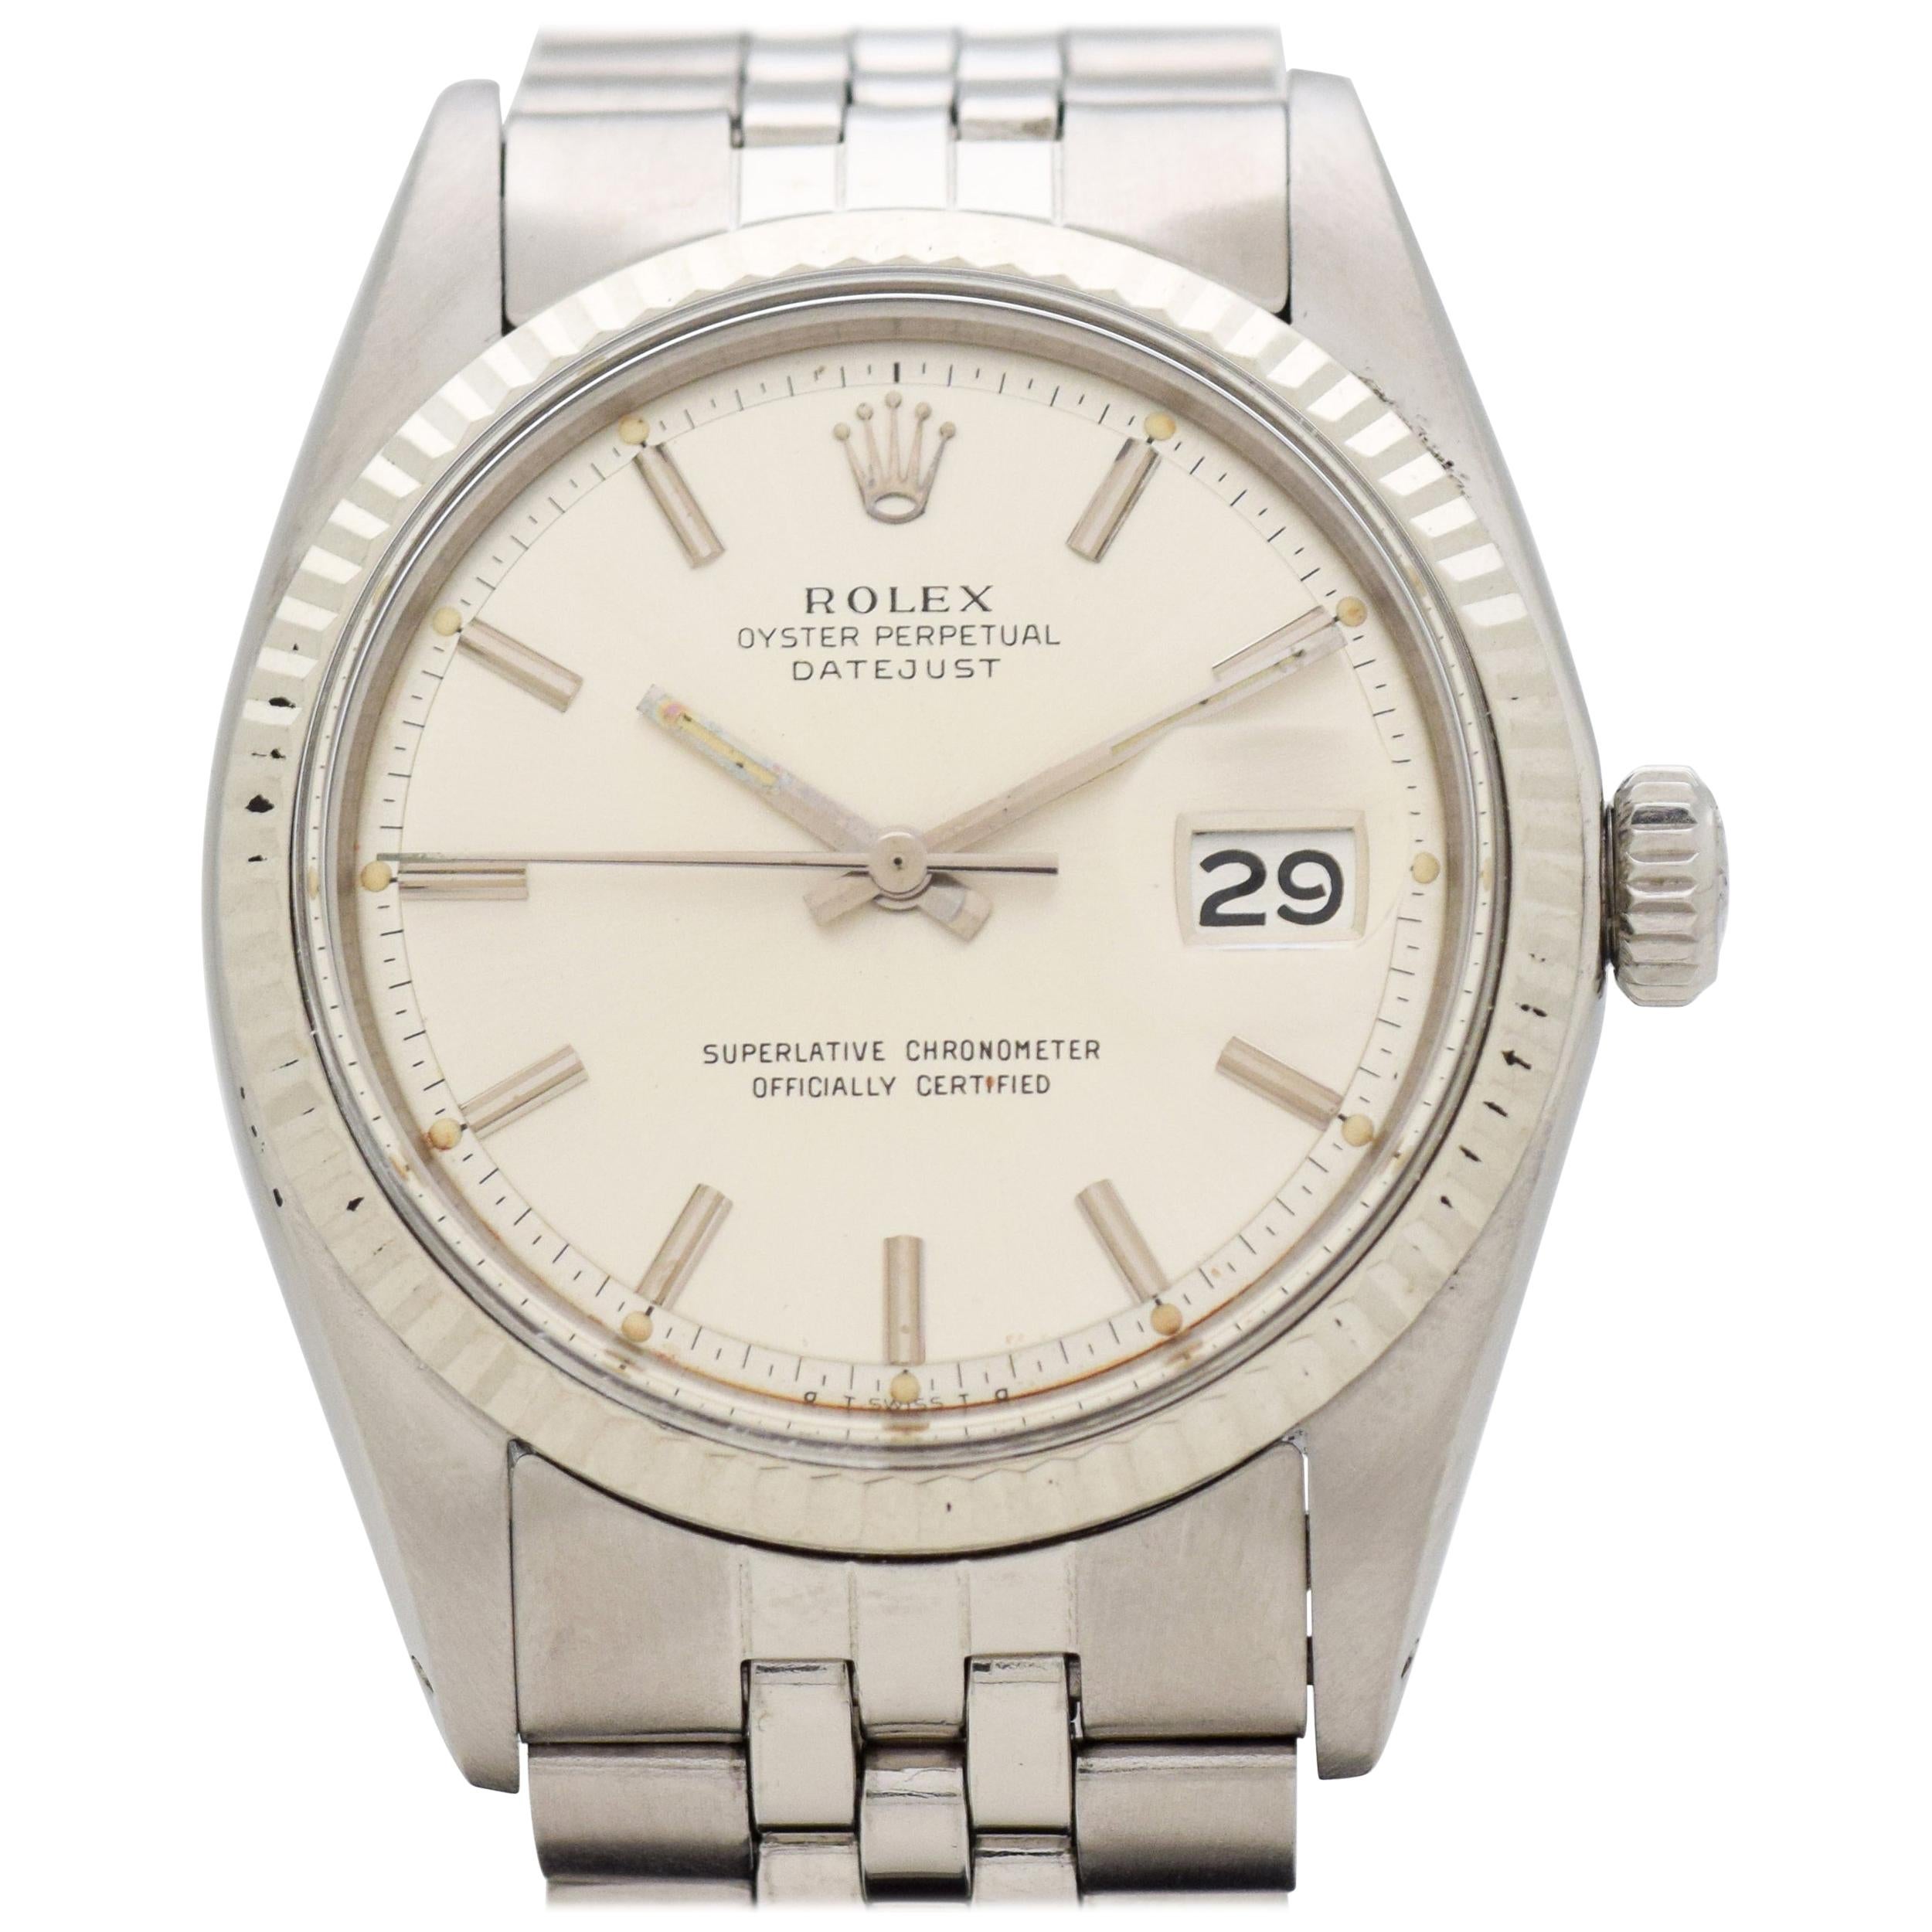 Vintage Rolex Datejust Reference 1601 Watch, 1973 For Sale